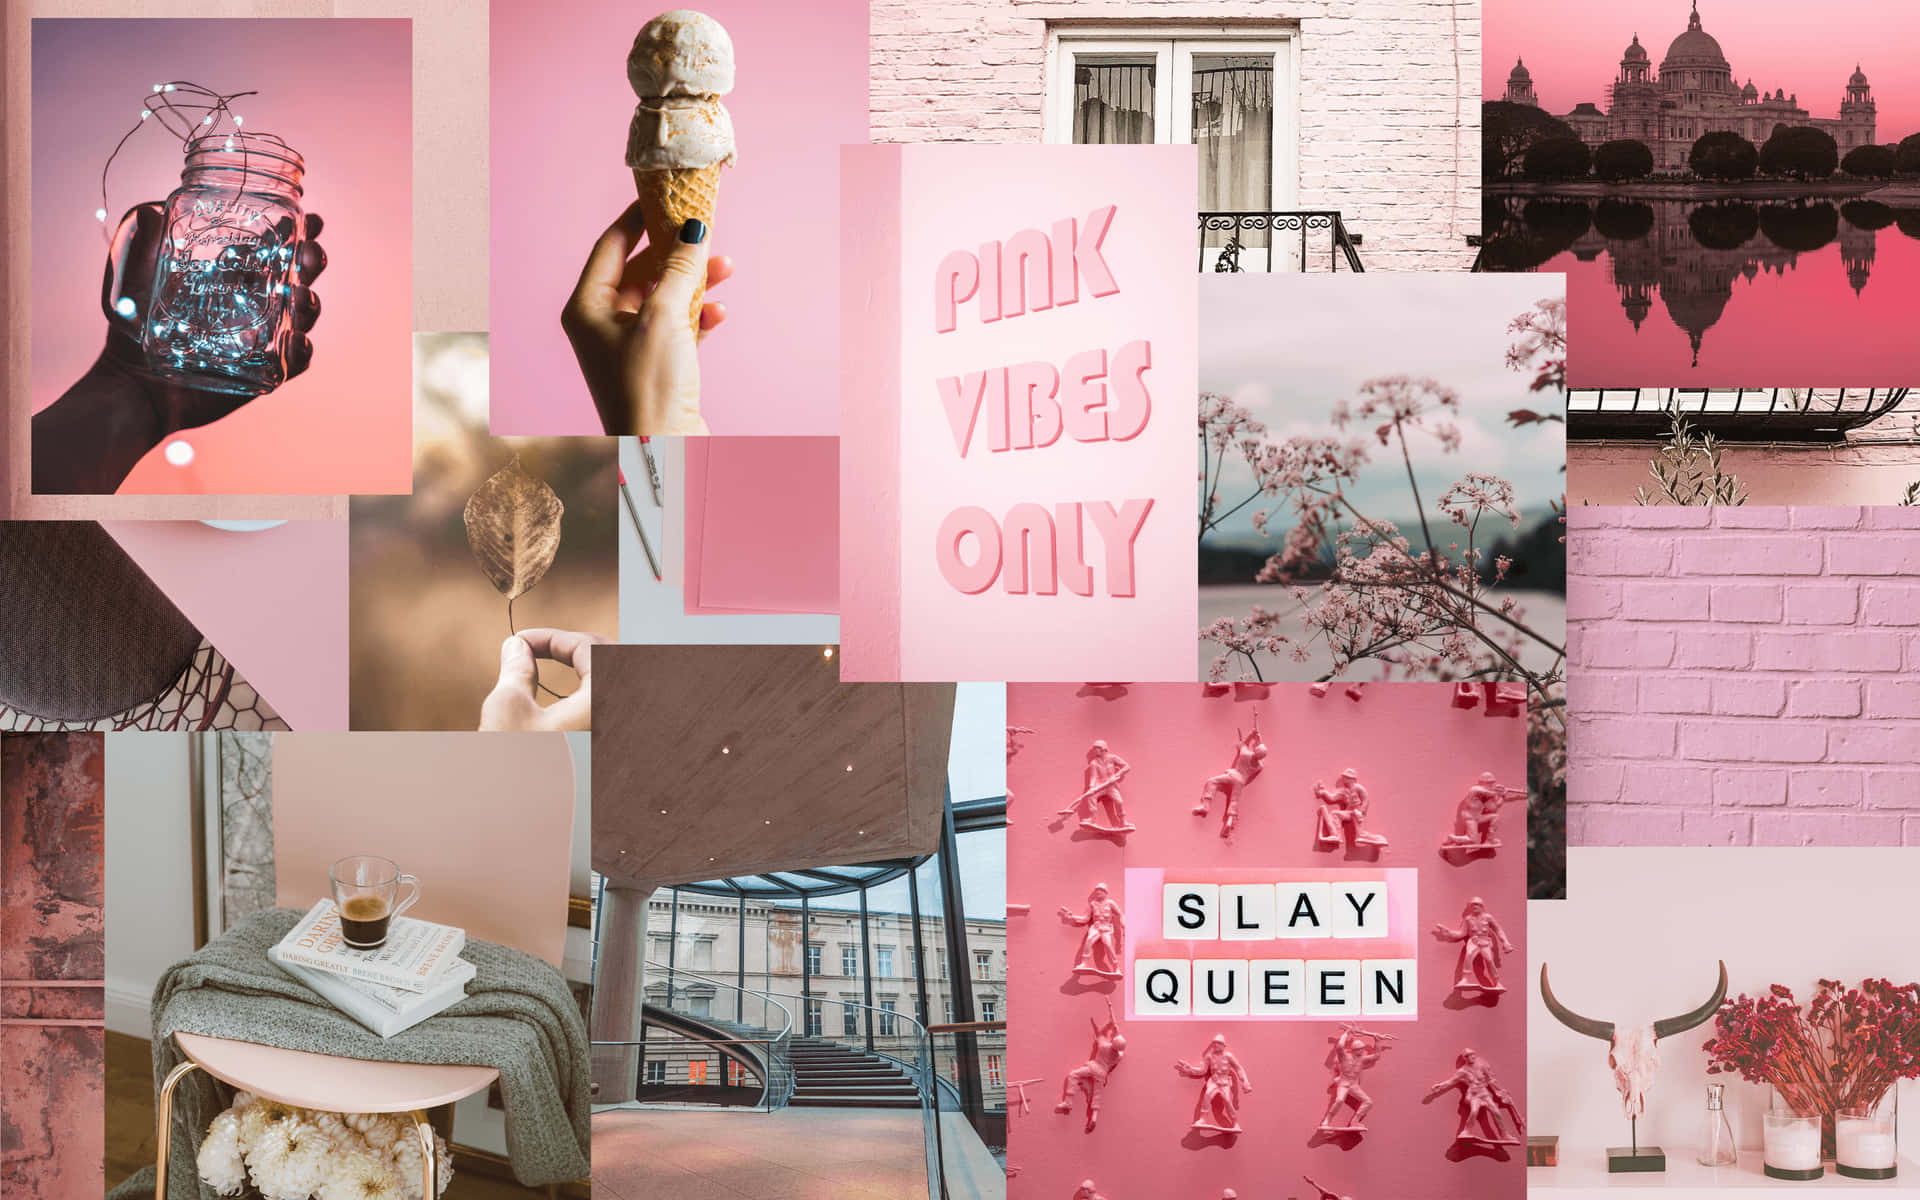 Pink Vibes Only - Collage Wallpaper